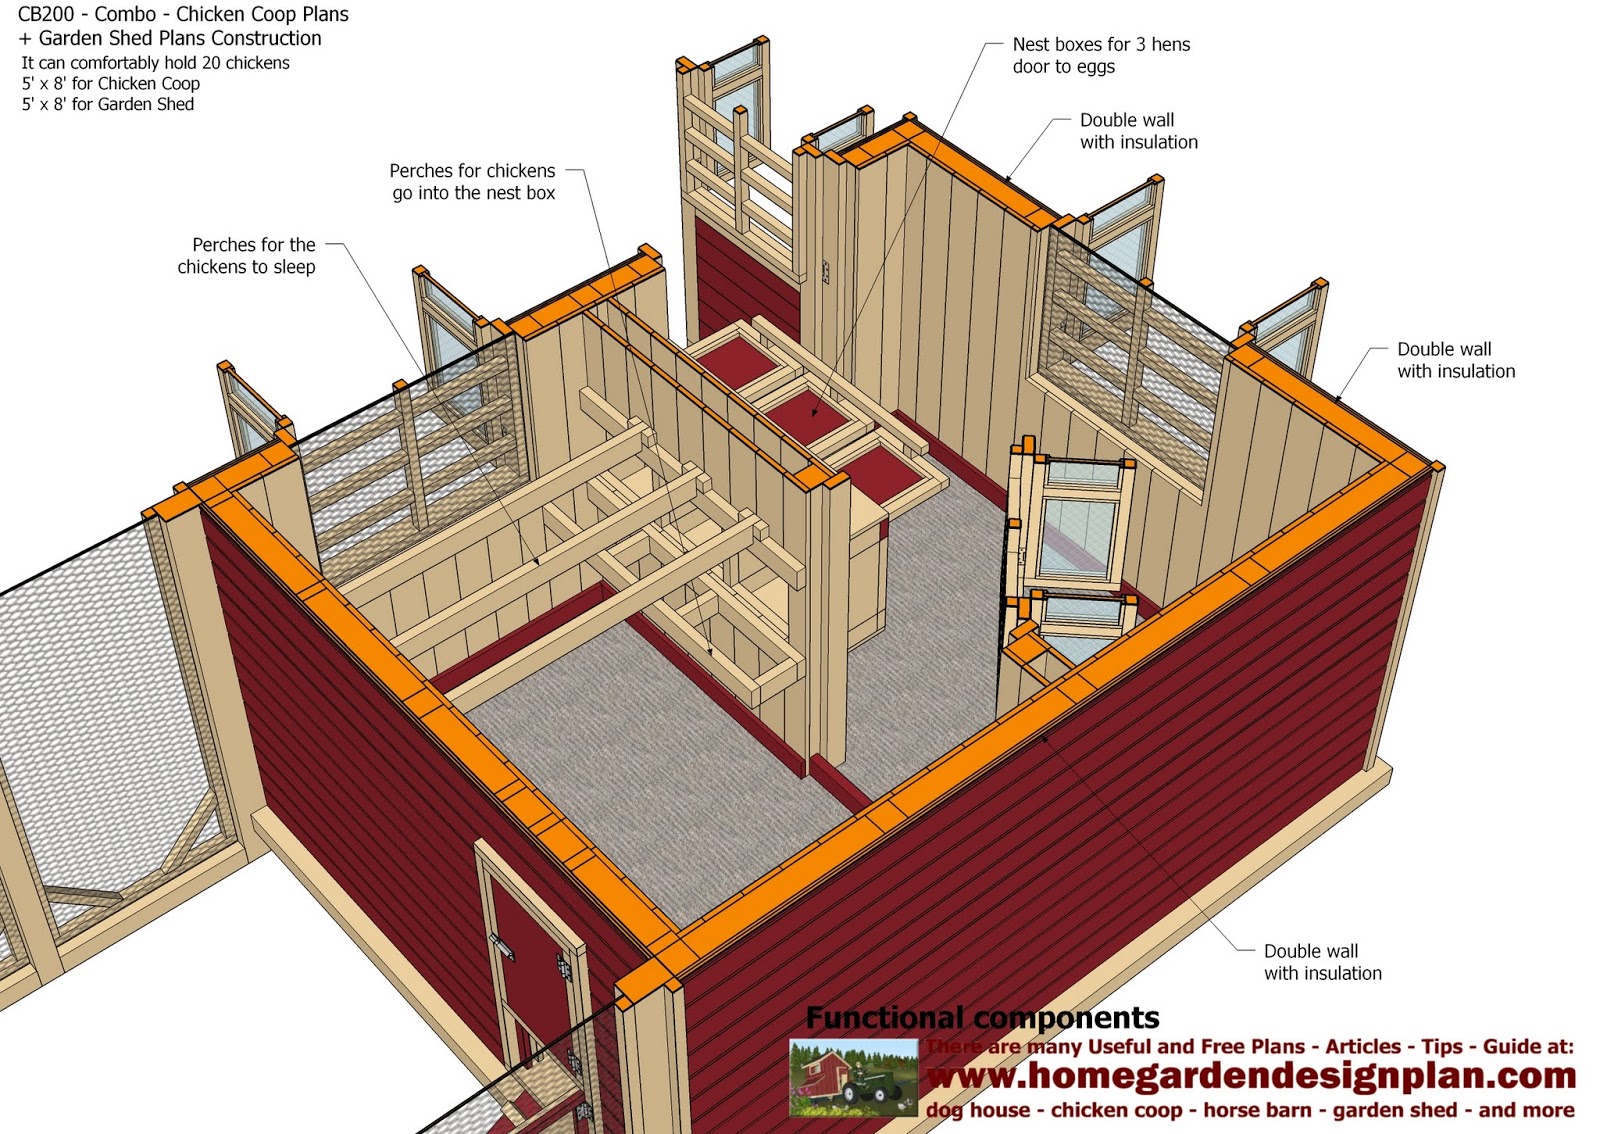 Shed Plans Building: CB200 Combo Plans Chicken Coop Plans 